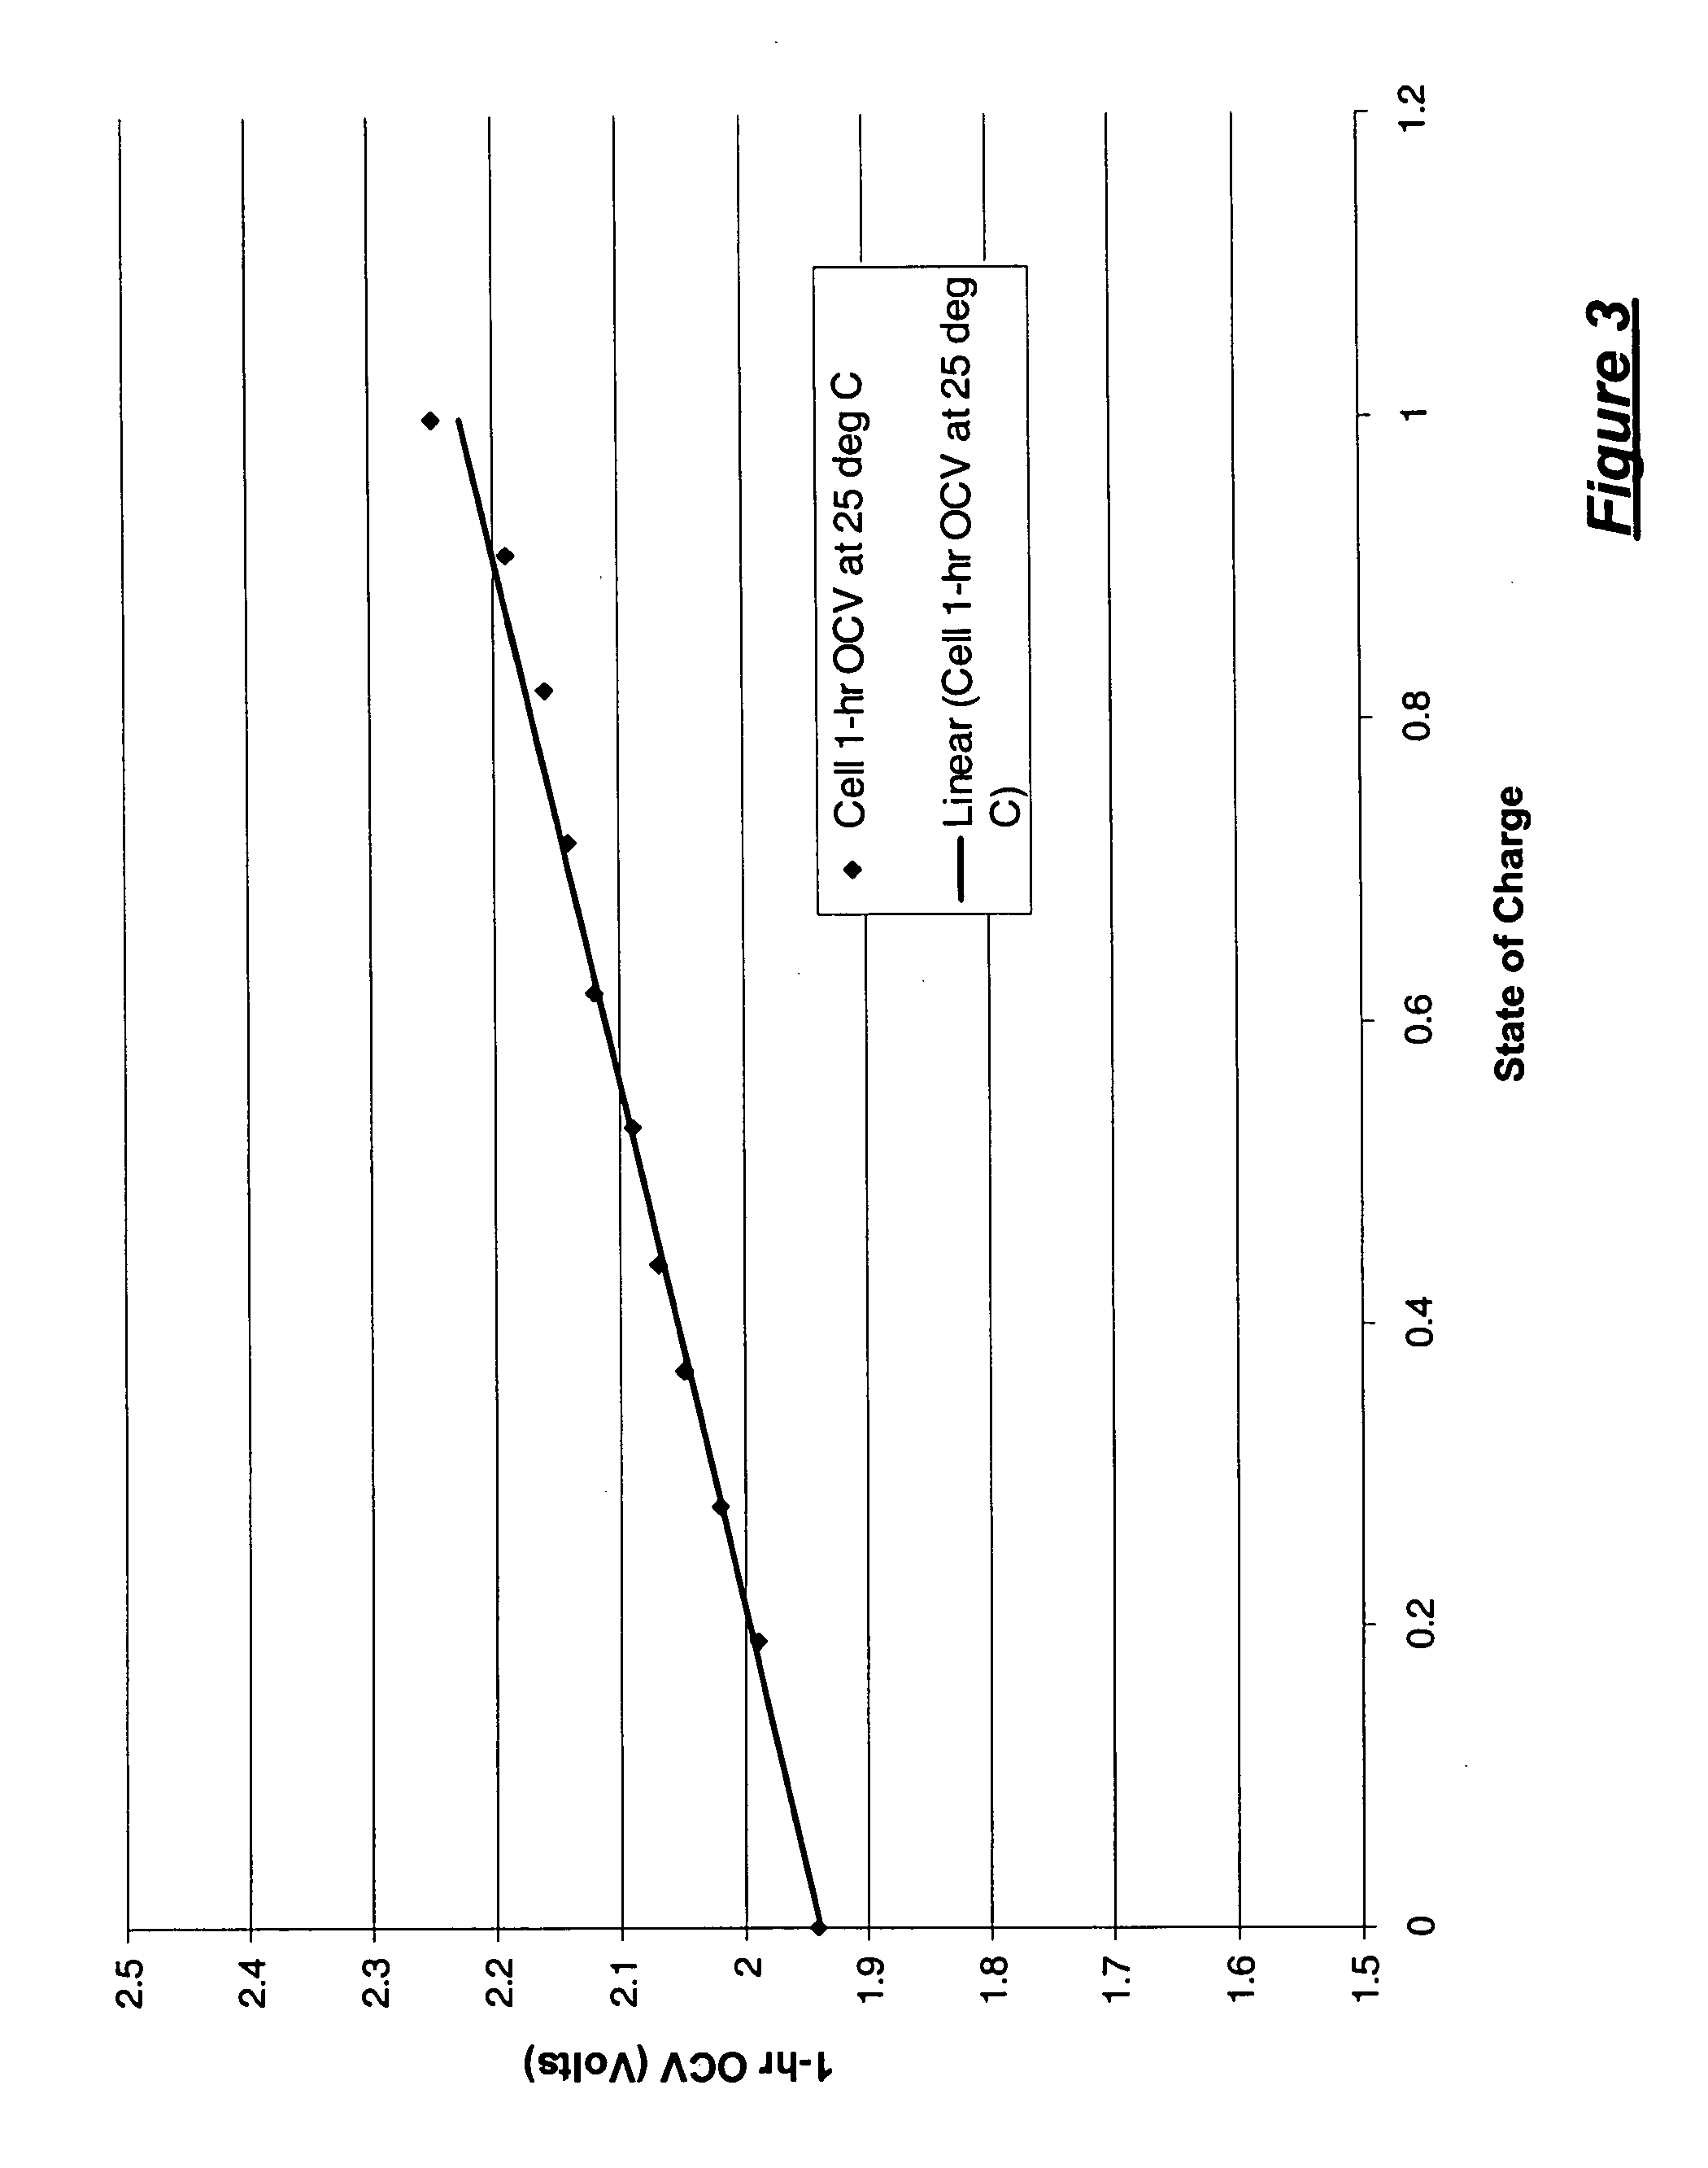 Generalized electrochemical cell state and parameter estimator